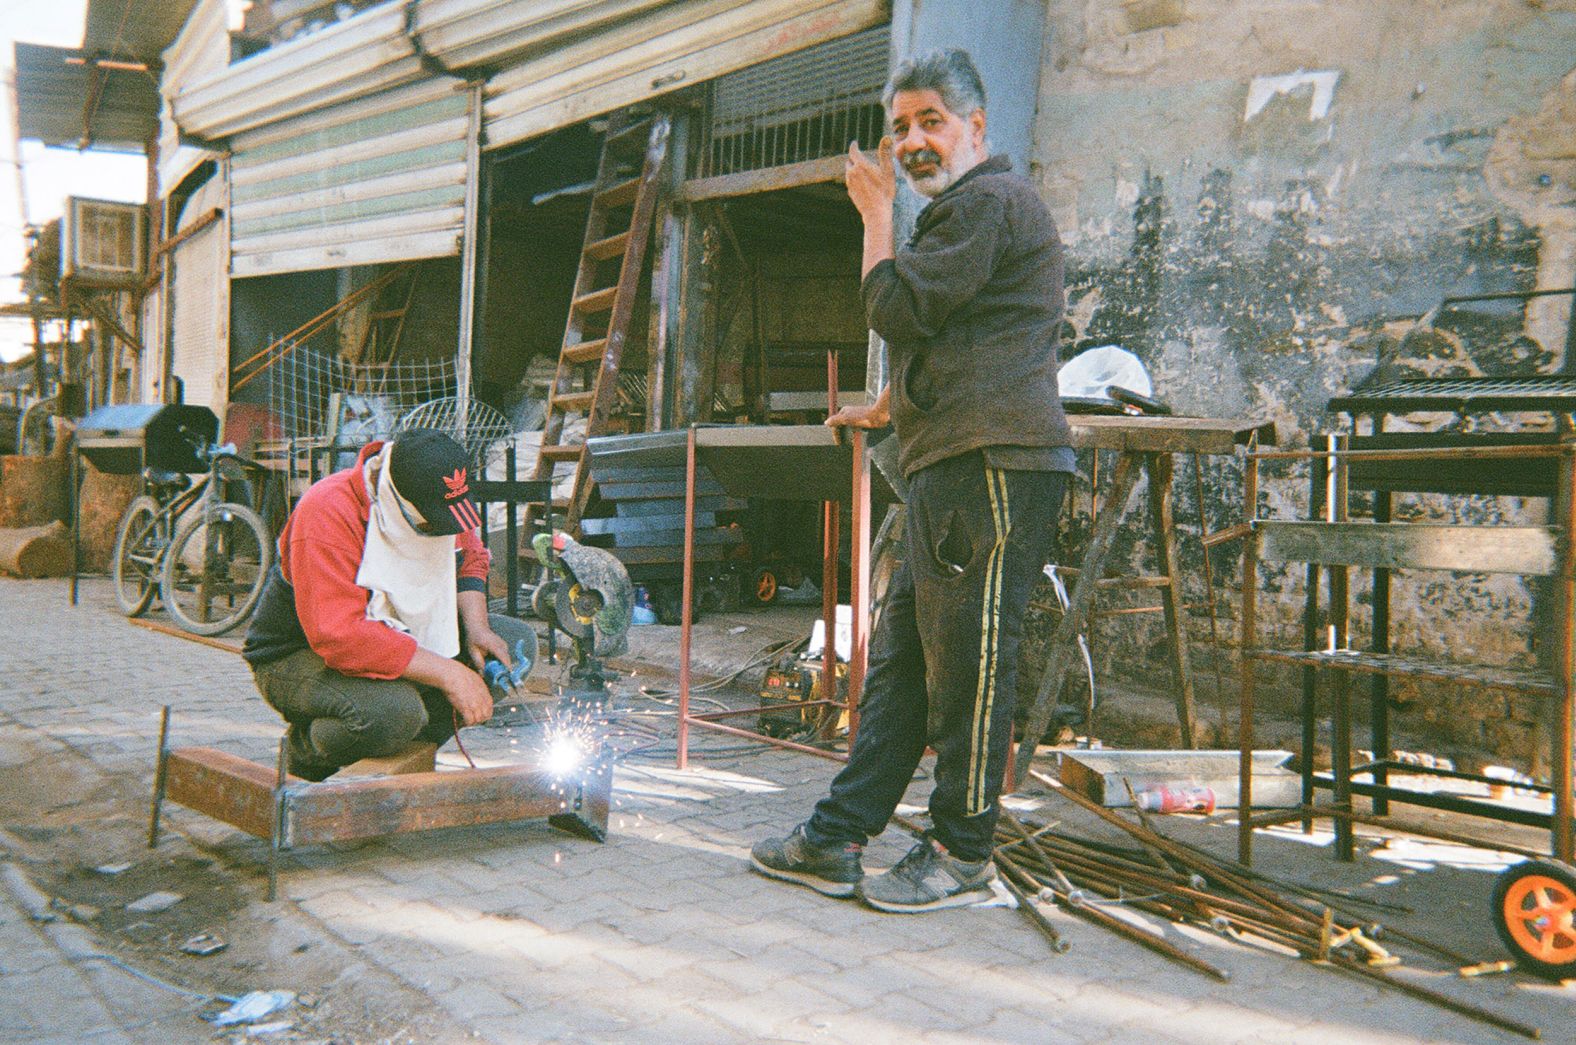 Zaid Kamel Abu Ali, 59, (right) looks up from his work as a blacksmith in Baghdad. "I have been working as a barbecue maker for 12 years," he told Raheem. "I enjoy my work a lot, sometimes I work even on weekends."